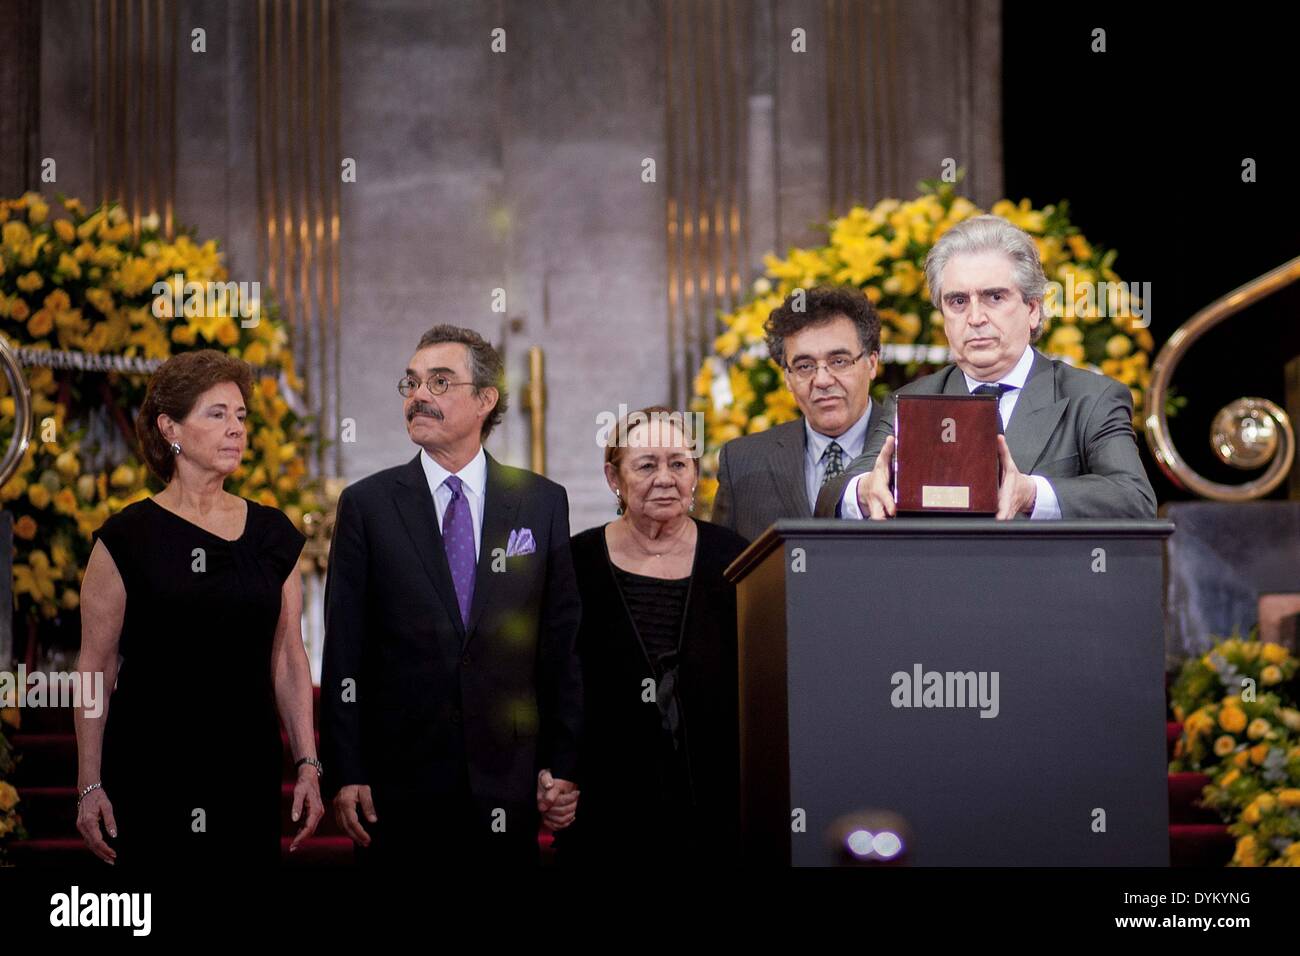 Mexico City, Mexico. 21st Apr, 2014. Rafael Tovar y de Teresa (R), president of the National Council for Culture and the Arts (Conaculta, for its acronym in Spanish), holds the urn with the remains of late Colombian writer Gabriel Garcia Marquez, next to Mercedes Barcha (C) widow of Garcia Marquez, and their sons Rodrigo Garcia Barcha (2nd R) and Gonzalo Garcia Barcha (2nd L) during a homage at the Palace of Fine Arts, in Mexico City, capital of Mexico, on April 21, 2014. Credit:  Pedro Mera/Xinhua/Alamy Live News Stock Photo